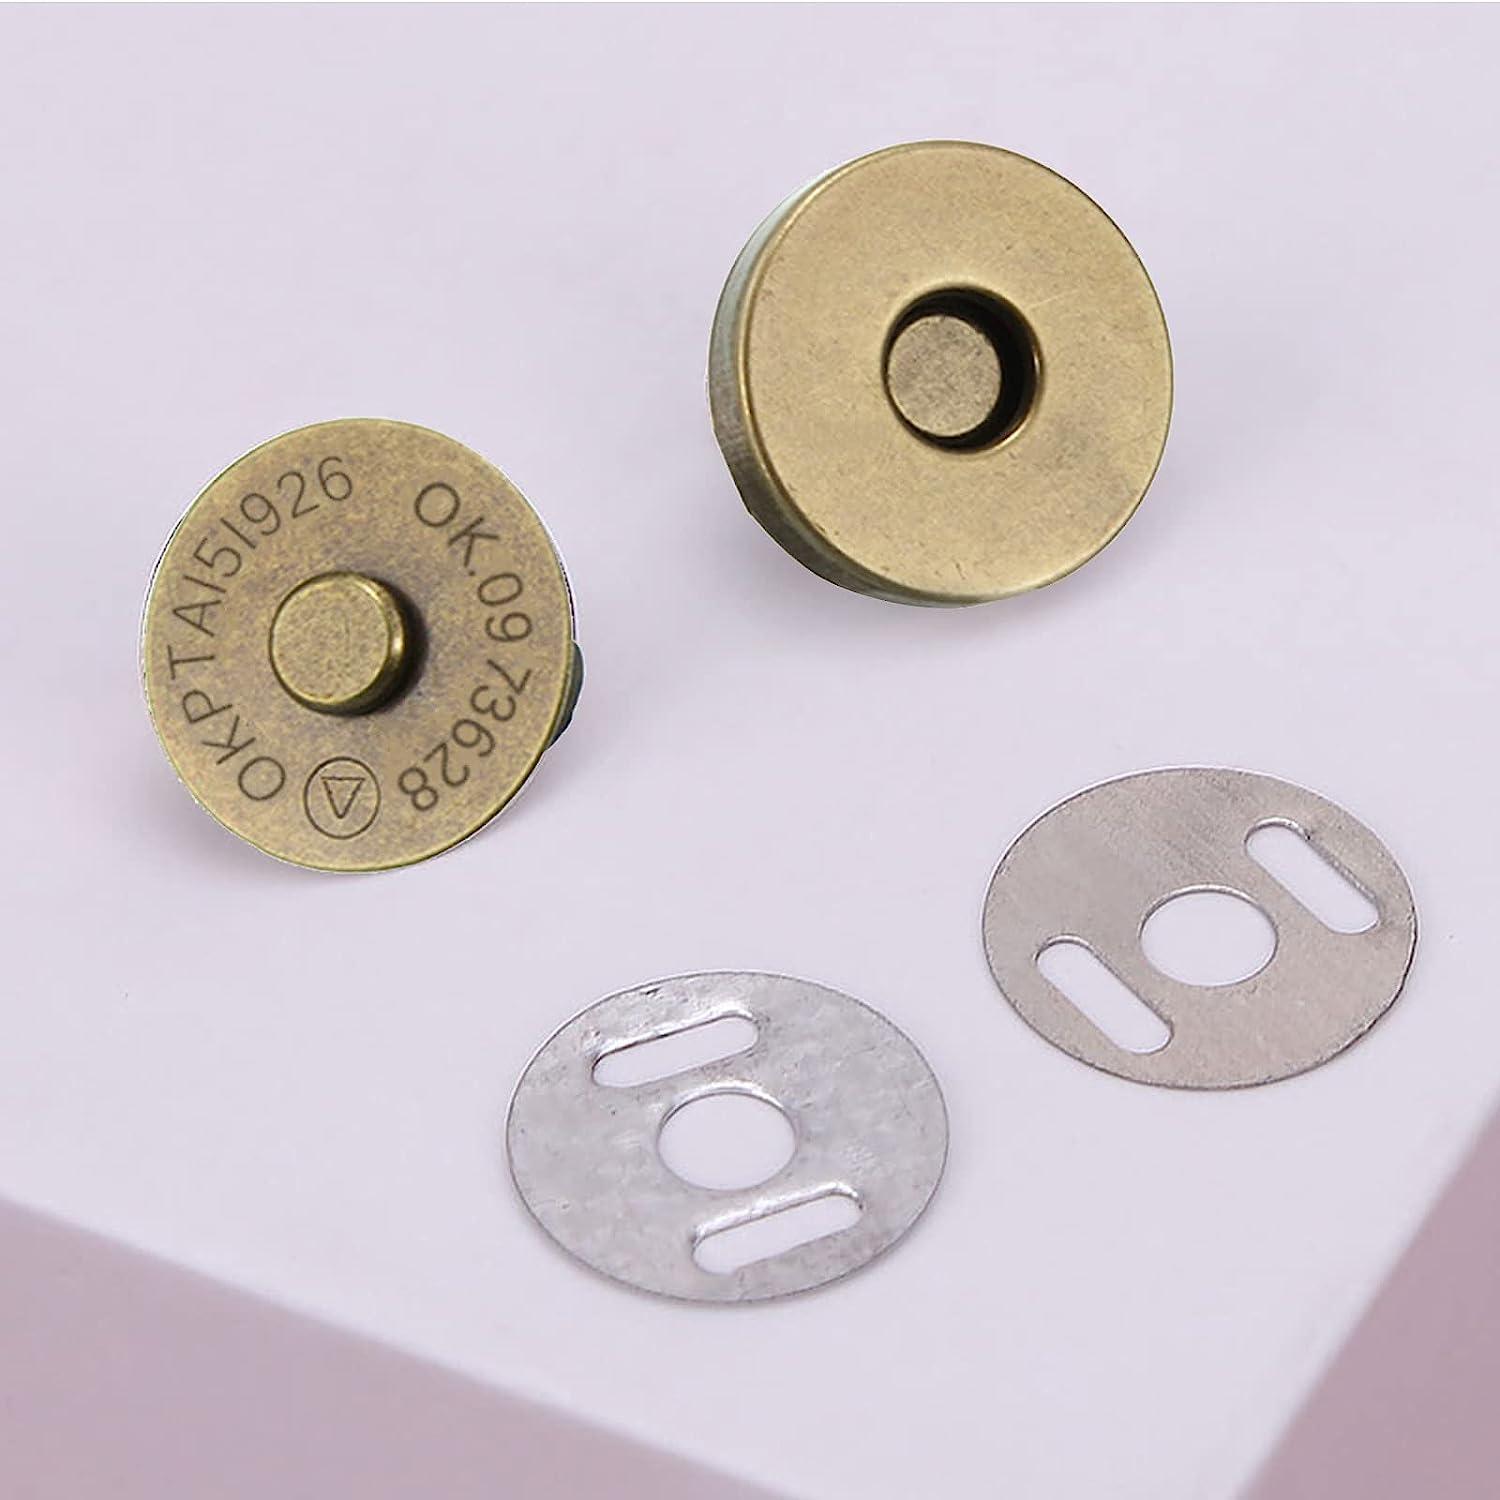 Sbest 20 Sets 14mm Coppery Strong Magnetic Button Clasps,Round Magnetic Snaps Bag Button Clasps Closure Purse Handbag with Washer Nickel DIY Craft